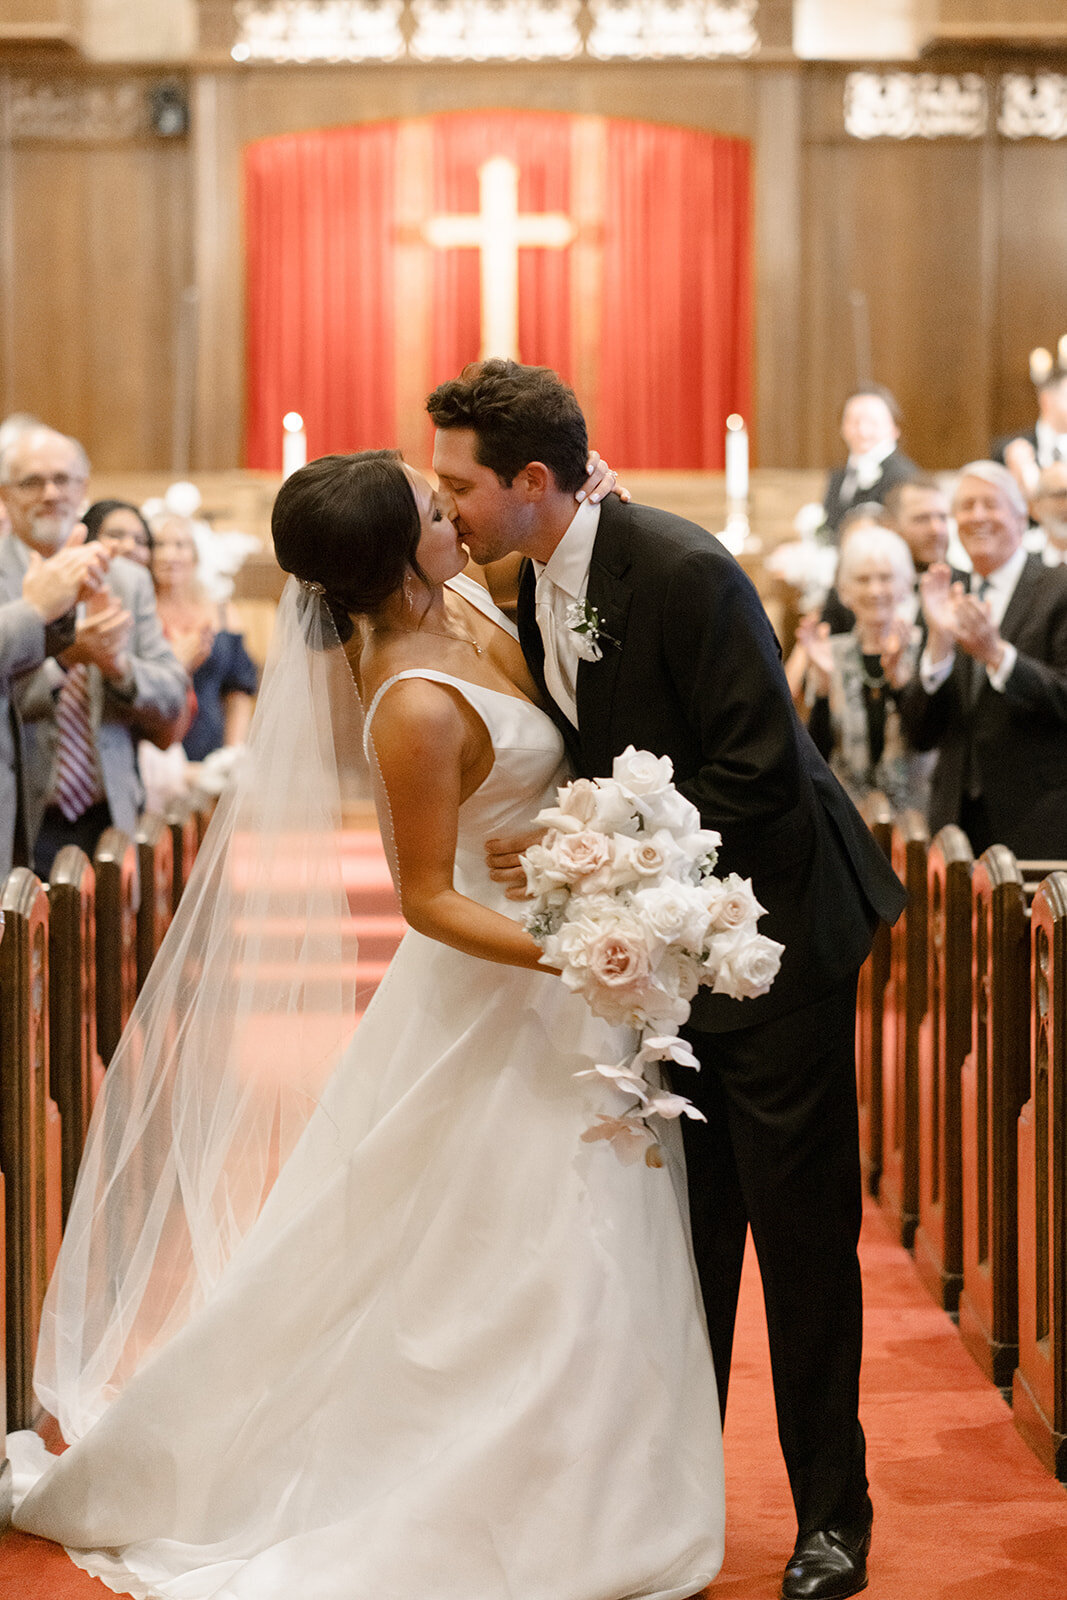 Kylie and Jack at The Grand Hall - Kansas City Wedding Photograpy - Nick and Lexie Photo Film-697